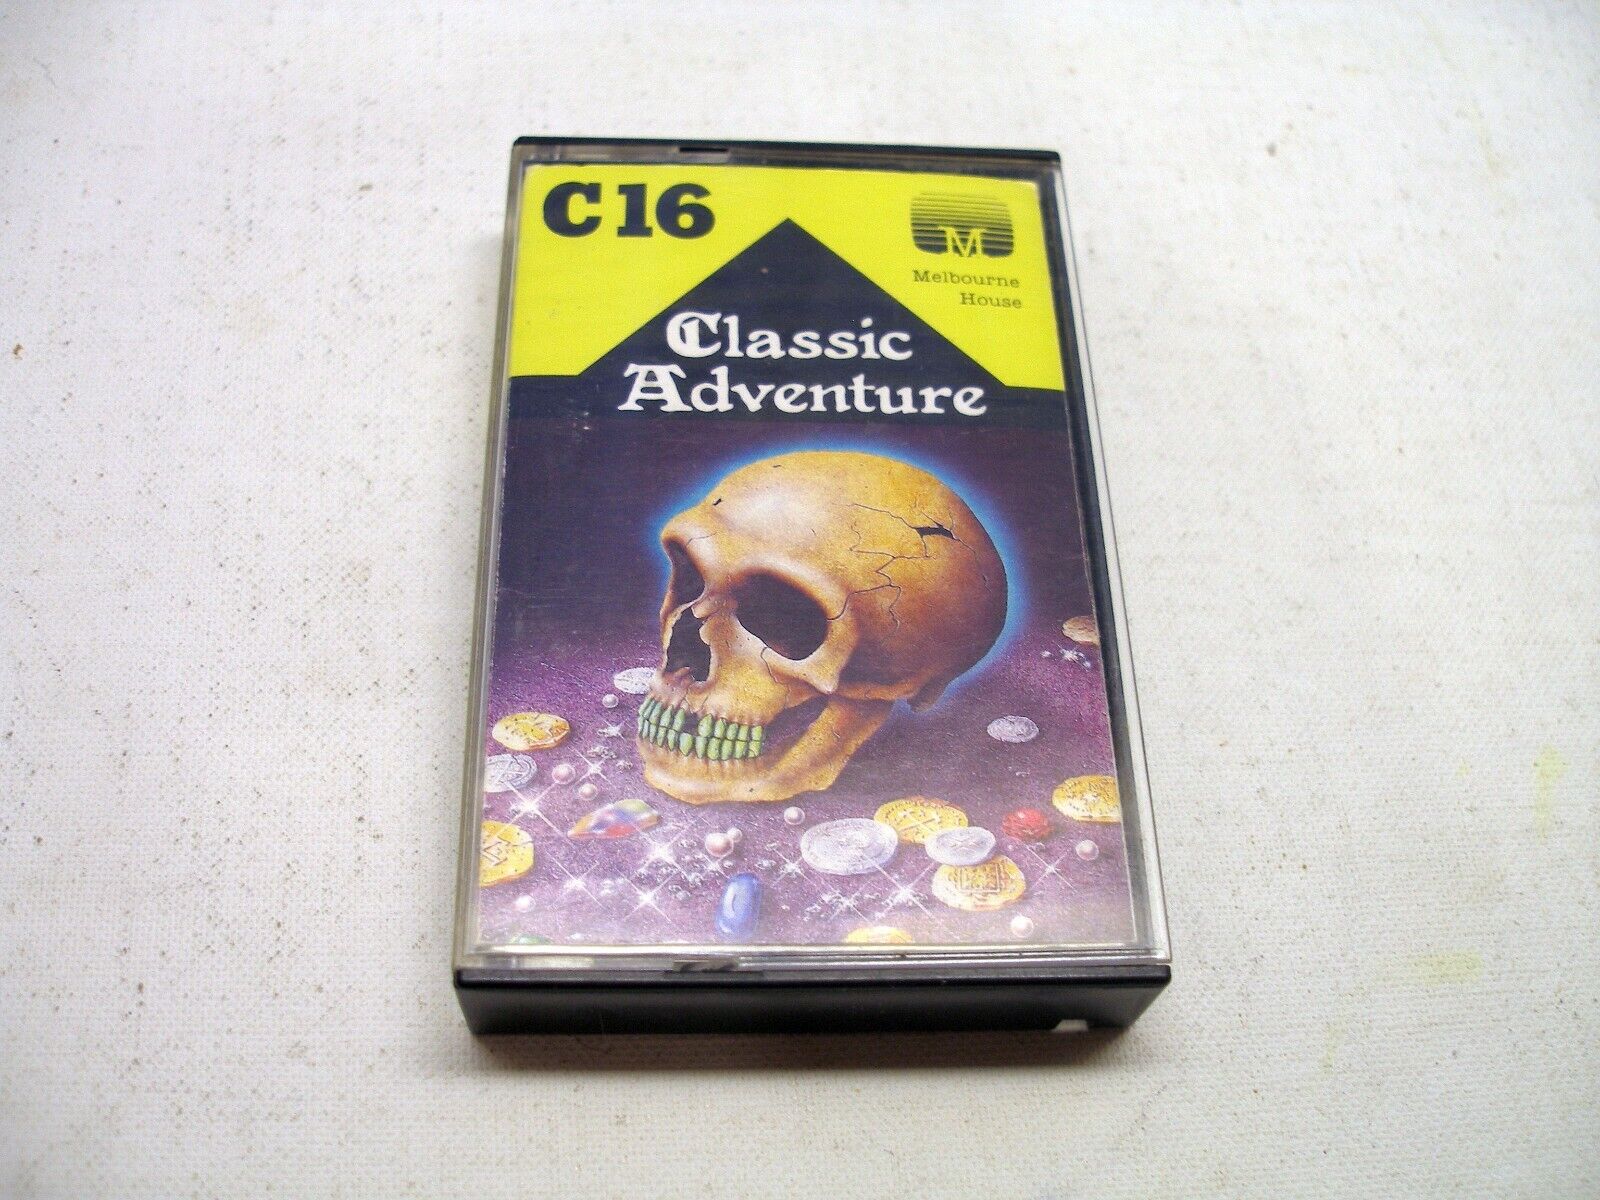 VERY RARE Classic Adventure by Melbourne House for the Commodore 16